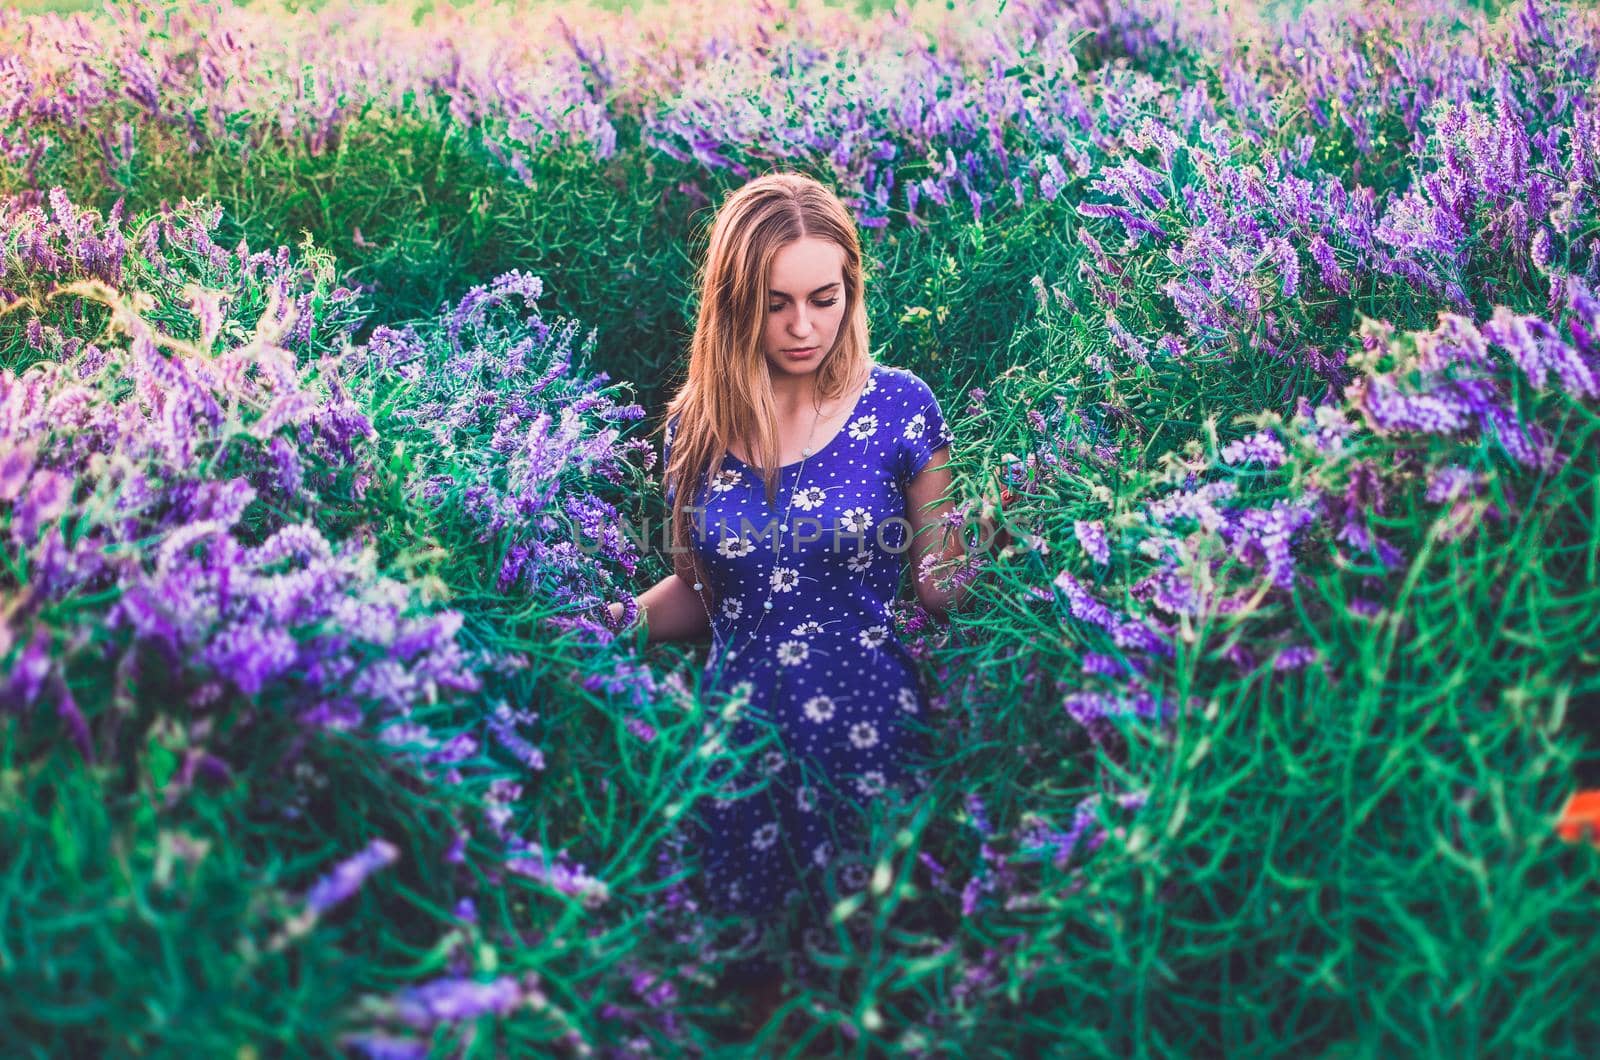 light-skinned European blonde young slim girl walks on tall grass overgrown with purple flowers. Women's blue short skin-tight dress with white daisy print.